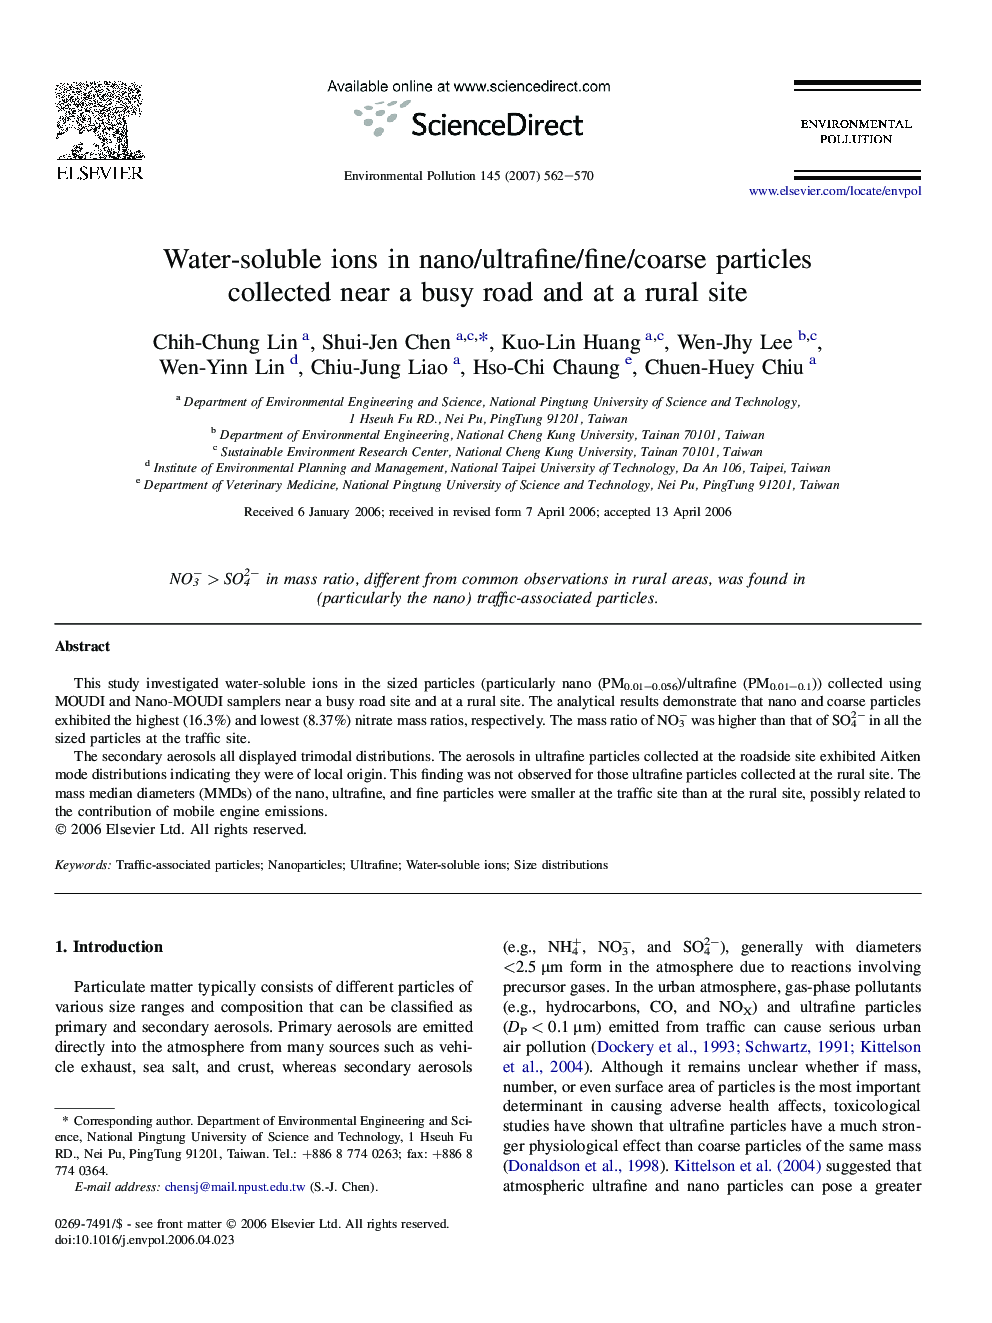 Water-soluble ions in nano/ultrafine/fine/coarse particles collected near a busy road and at a rural site